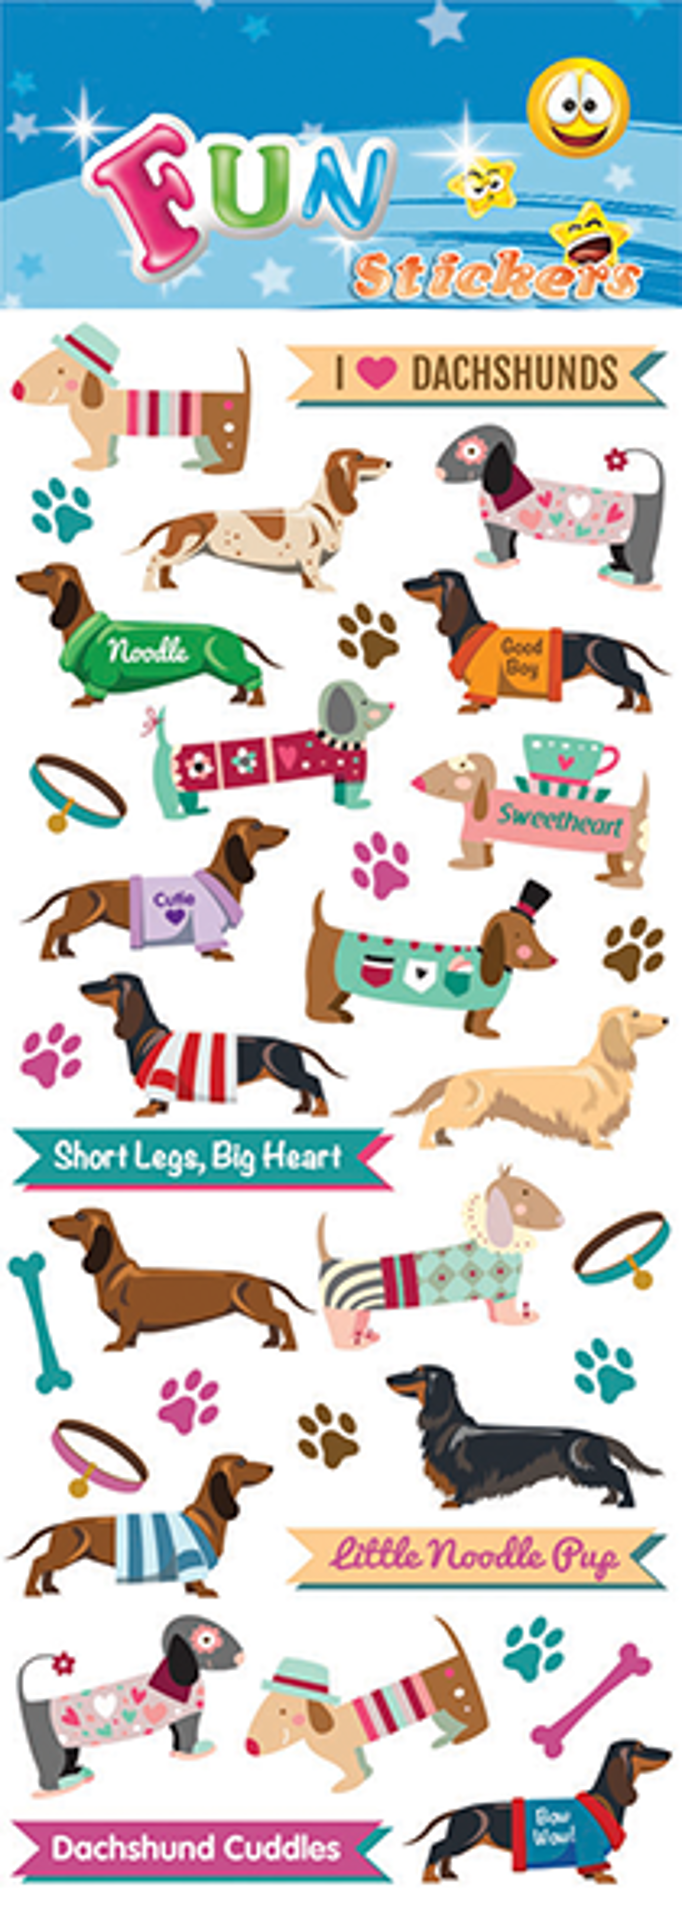 Dachshunds Stickers